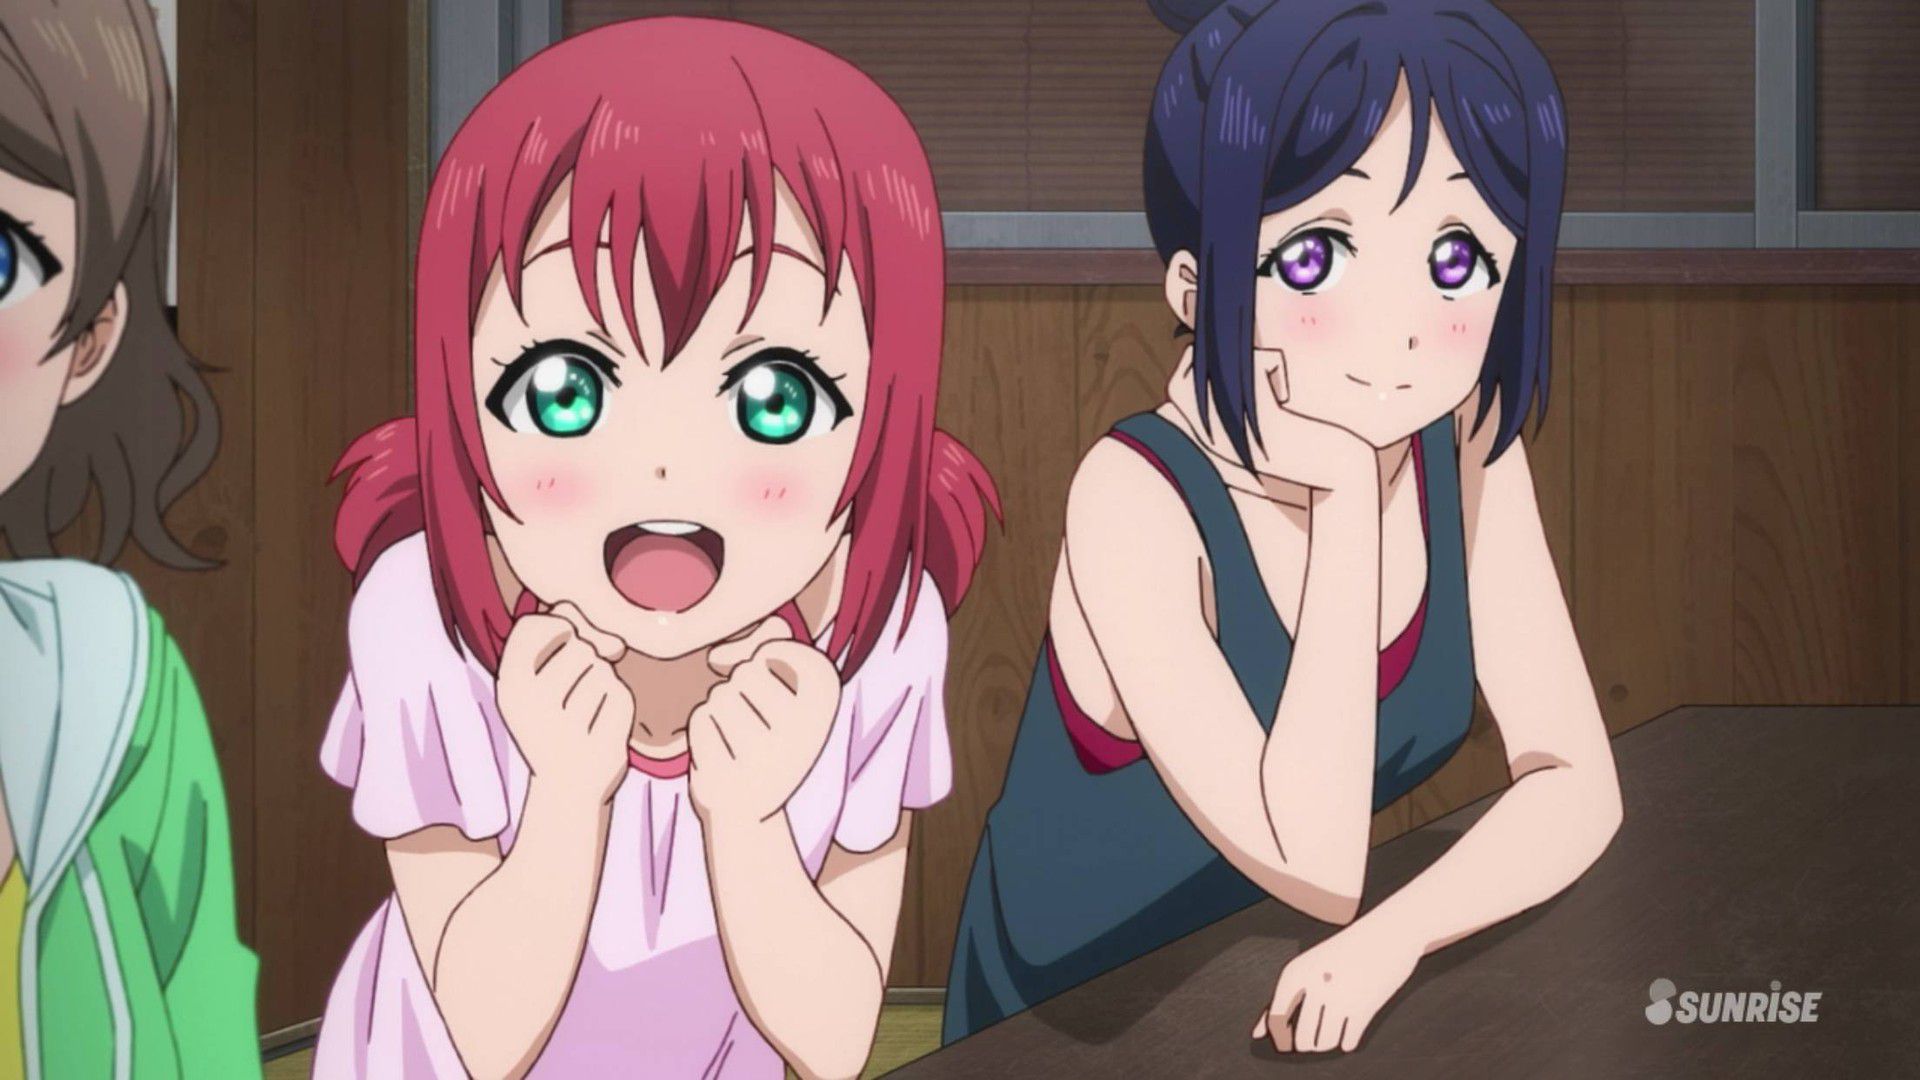 "Love live! Sunshine ' diamond-CHAN for this hairstyle like Guy wwwwwww 7